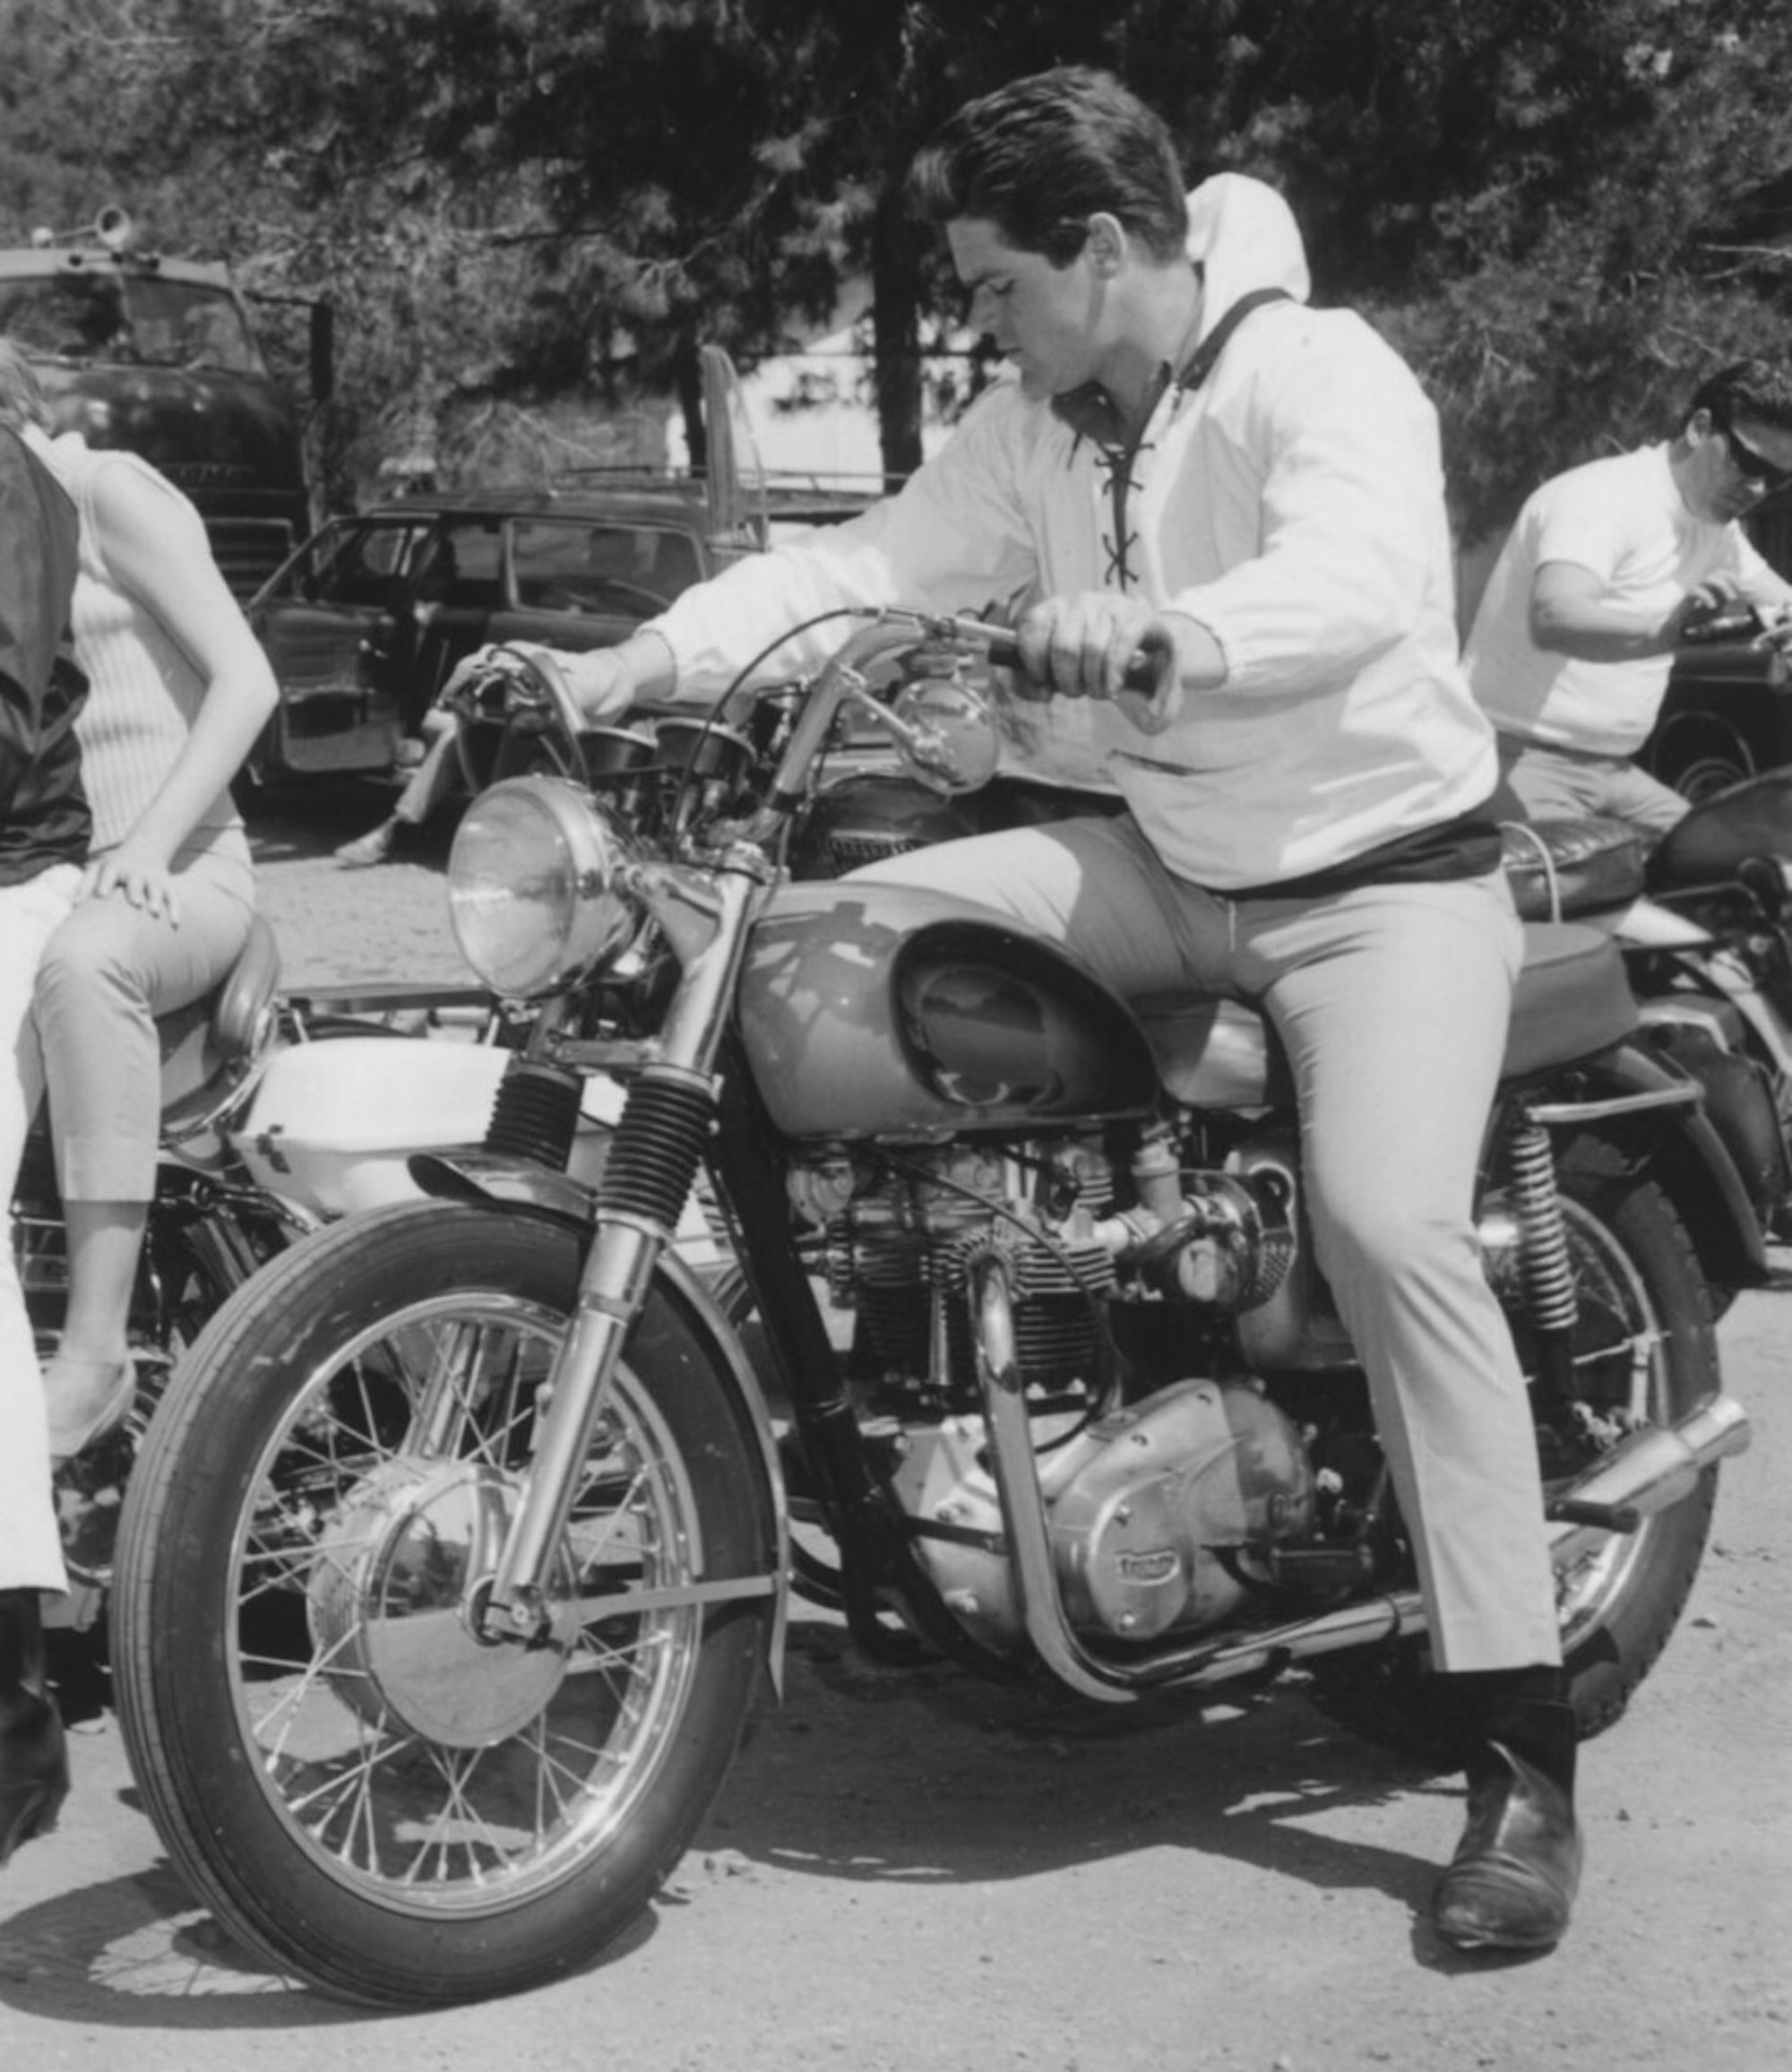 Jerry Schilling, a member of Elvis's Memphis Mafia gang, with the Triumph Motorcycle bestowed by Elvis Presley. Media provided by Triumph.